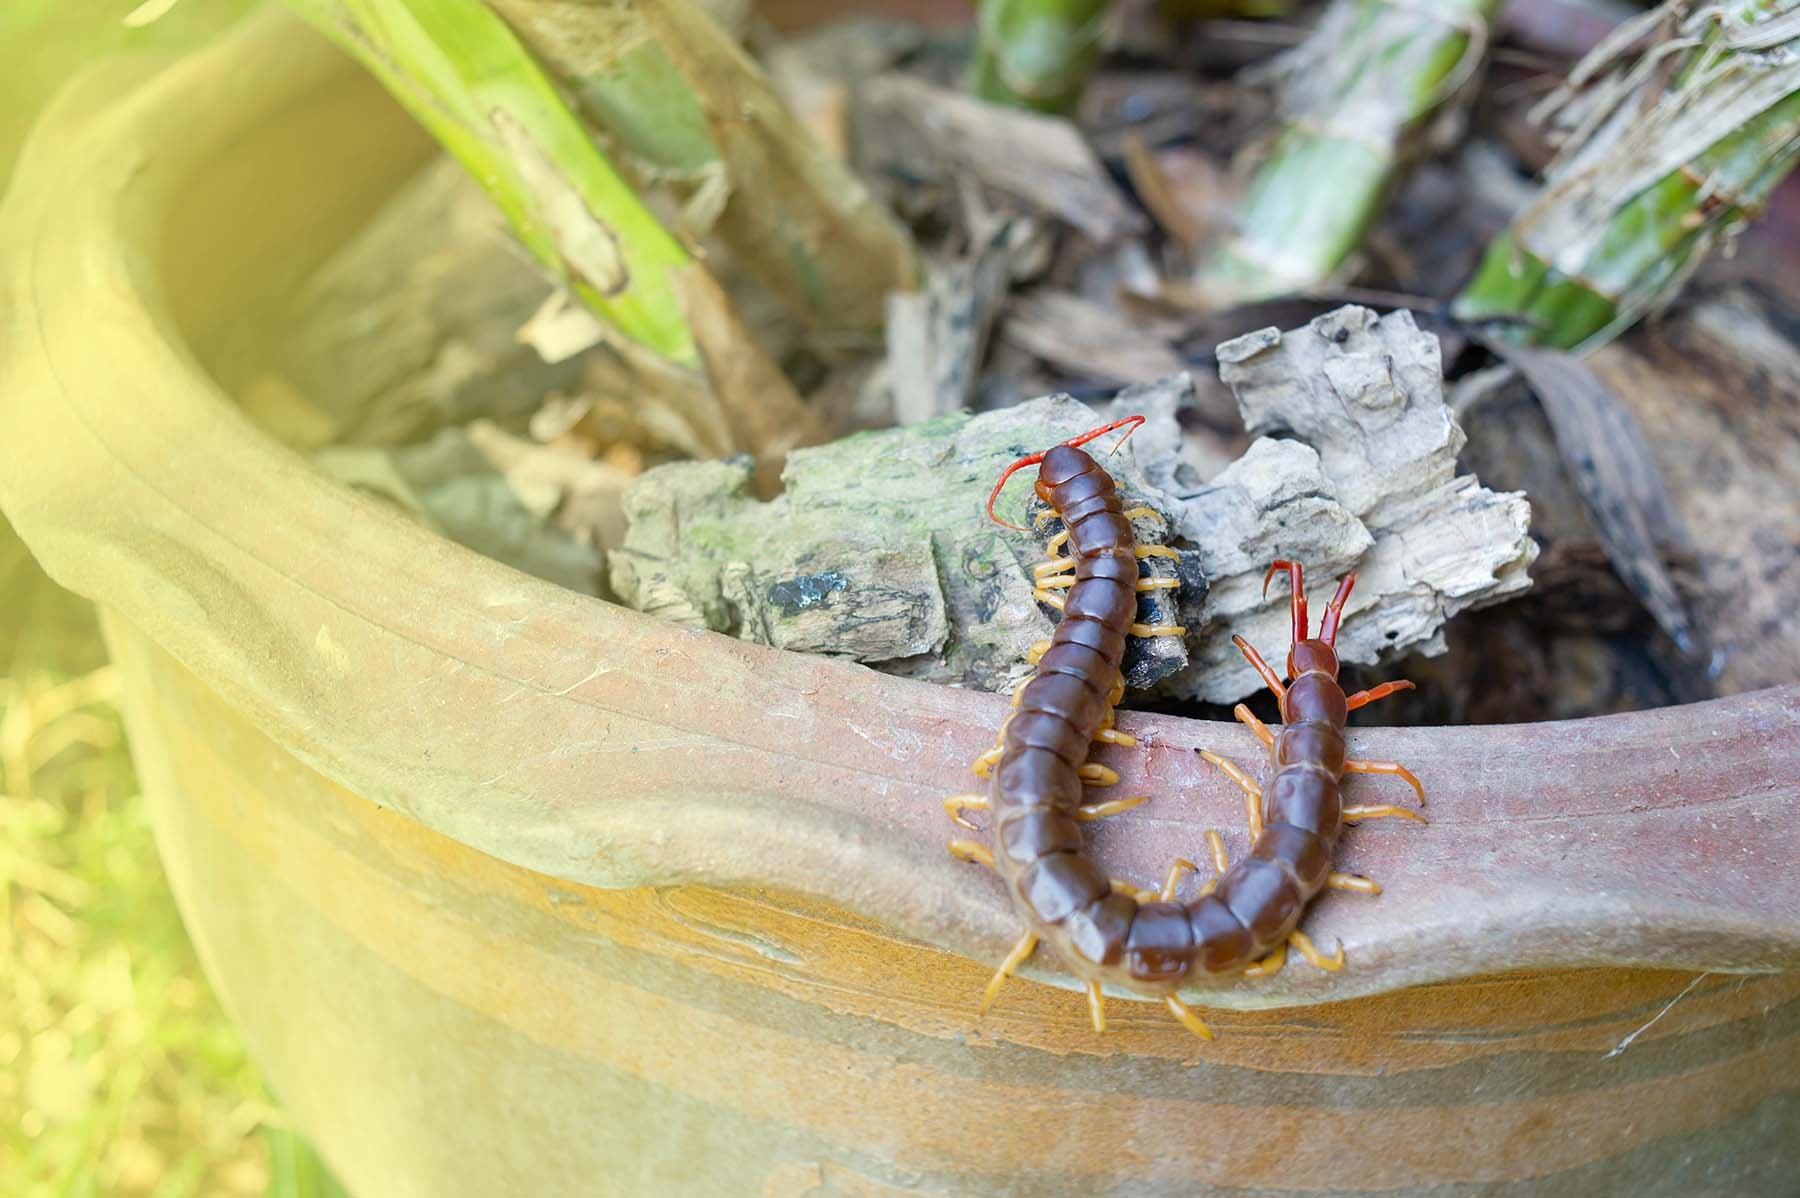 Common Houseplant Pests: How to Deal with Centipedes